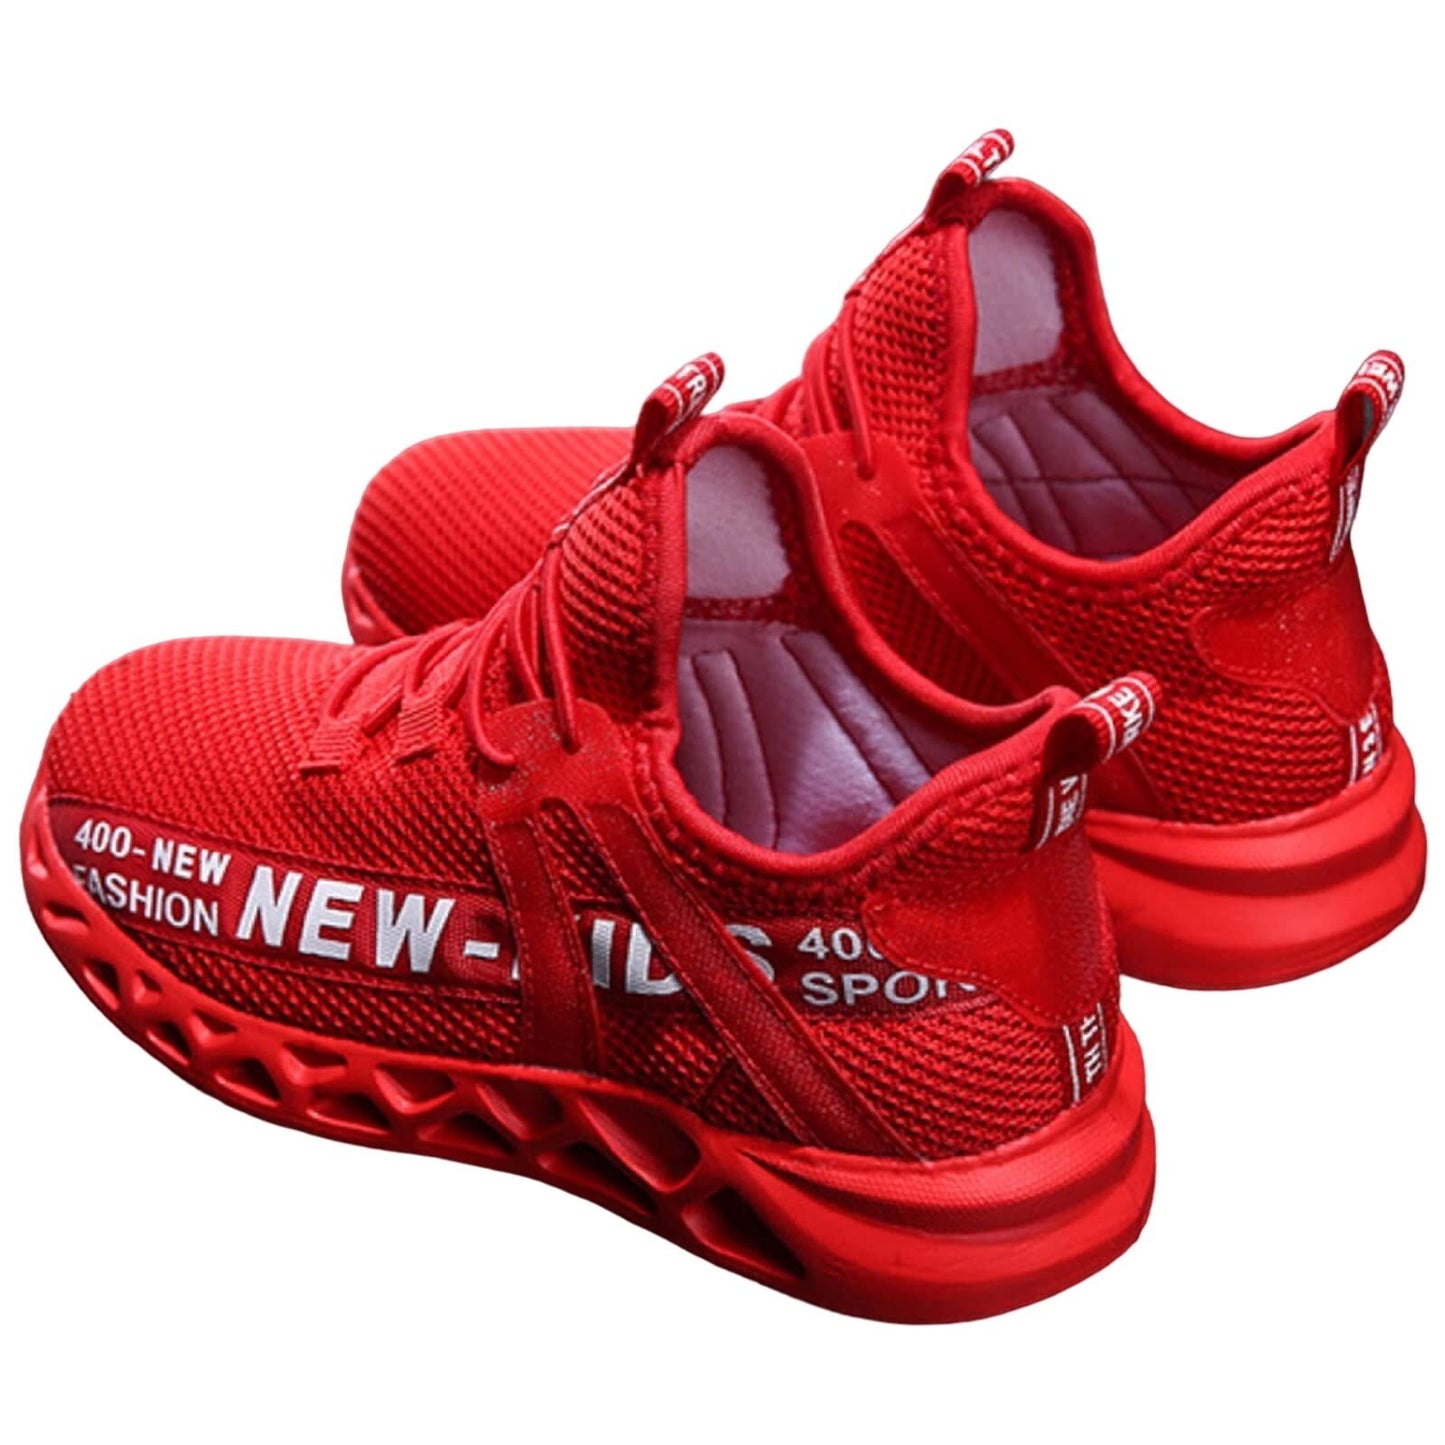 Daclay Red Knit Sneakers for Toddlers - Size 7.5 Affordable Mesh Athletic Shoes